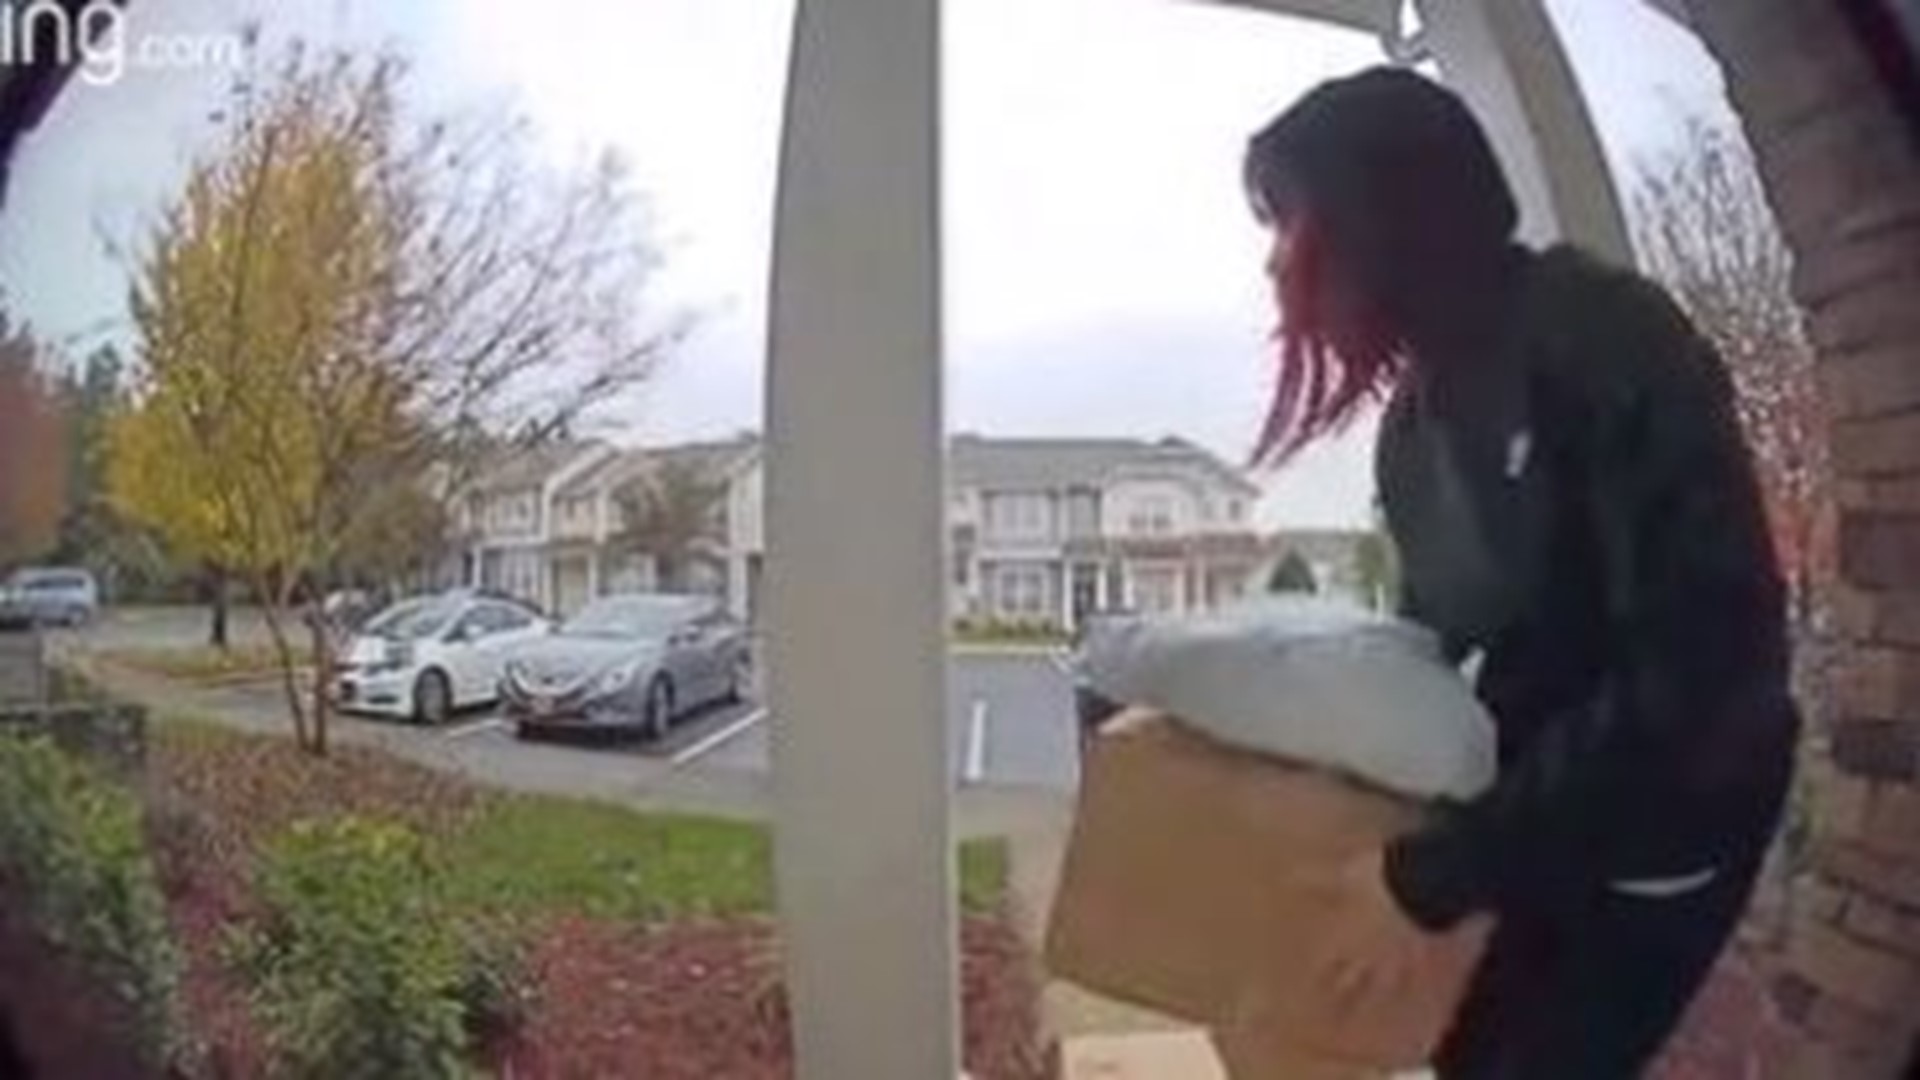 While many are away for the Thanksgiving holiday, thieves are targeting front porches.